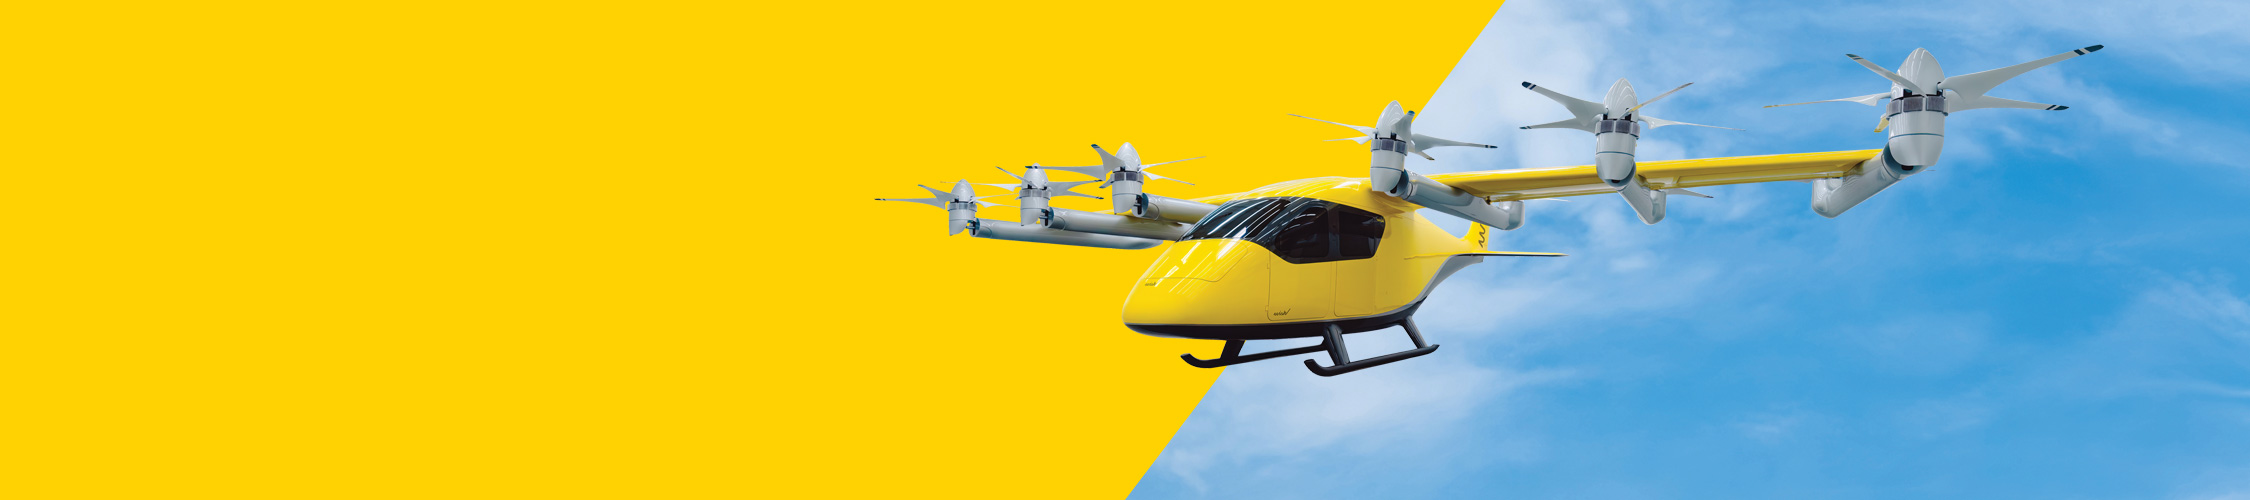 Wisk to Make EAA AirVenture Oshkosh Debut with Autonomous Air Taxi